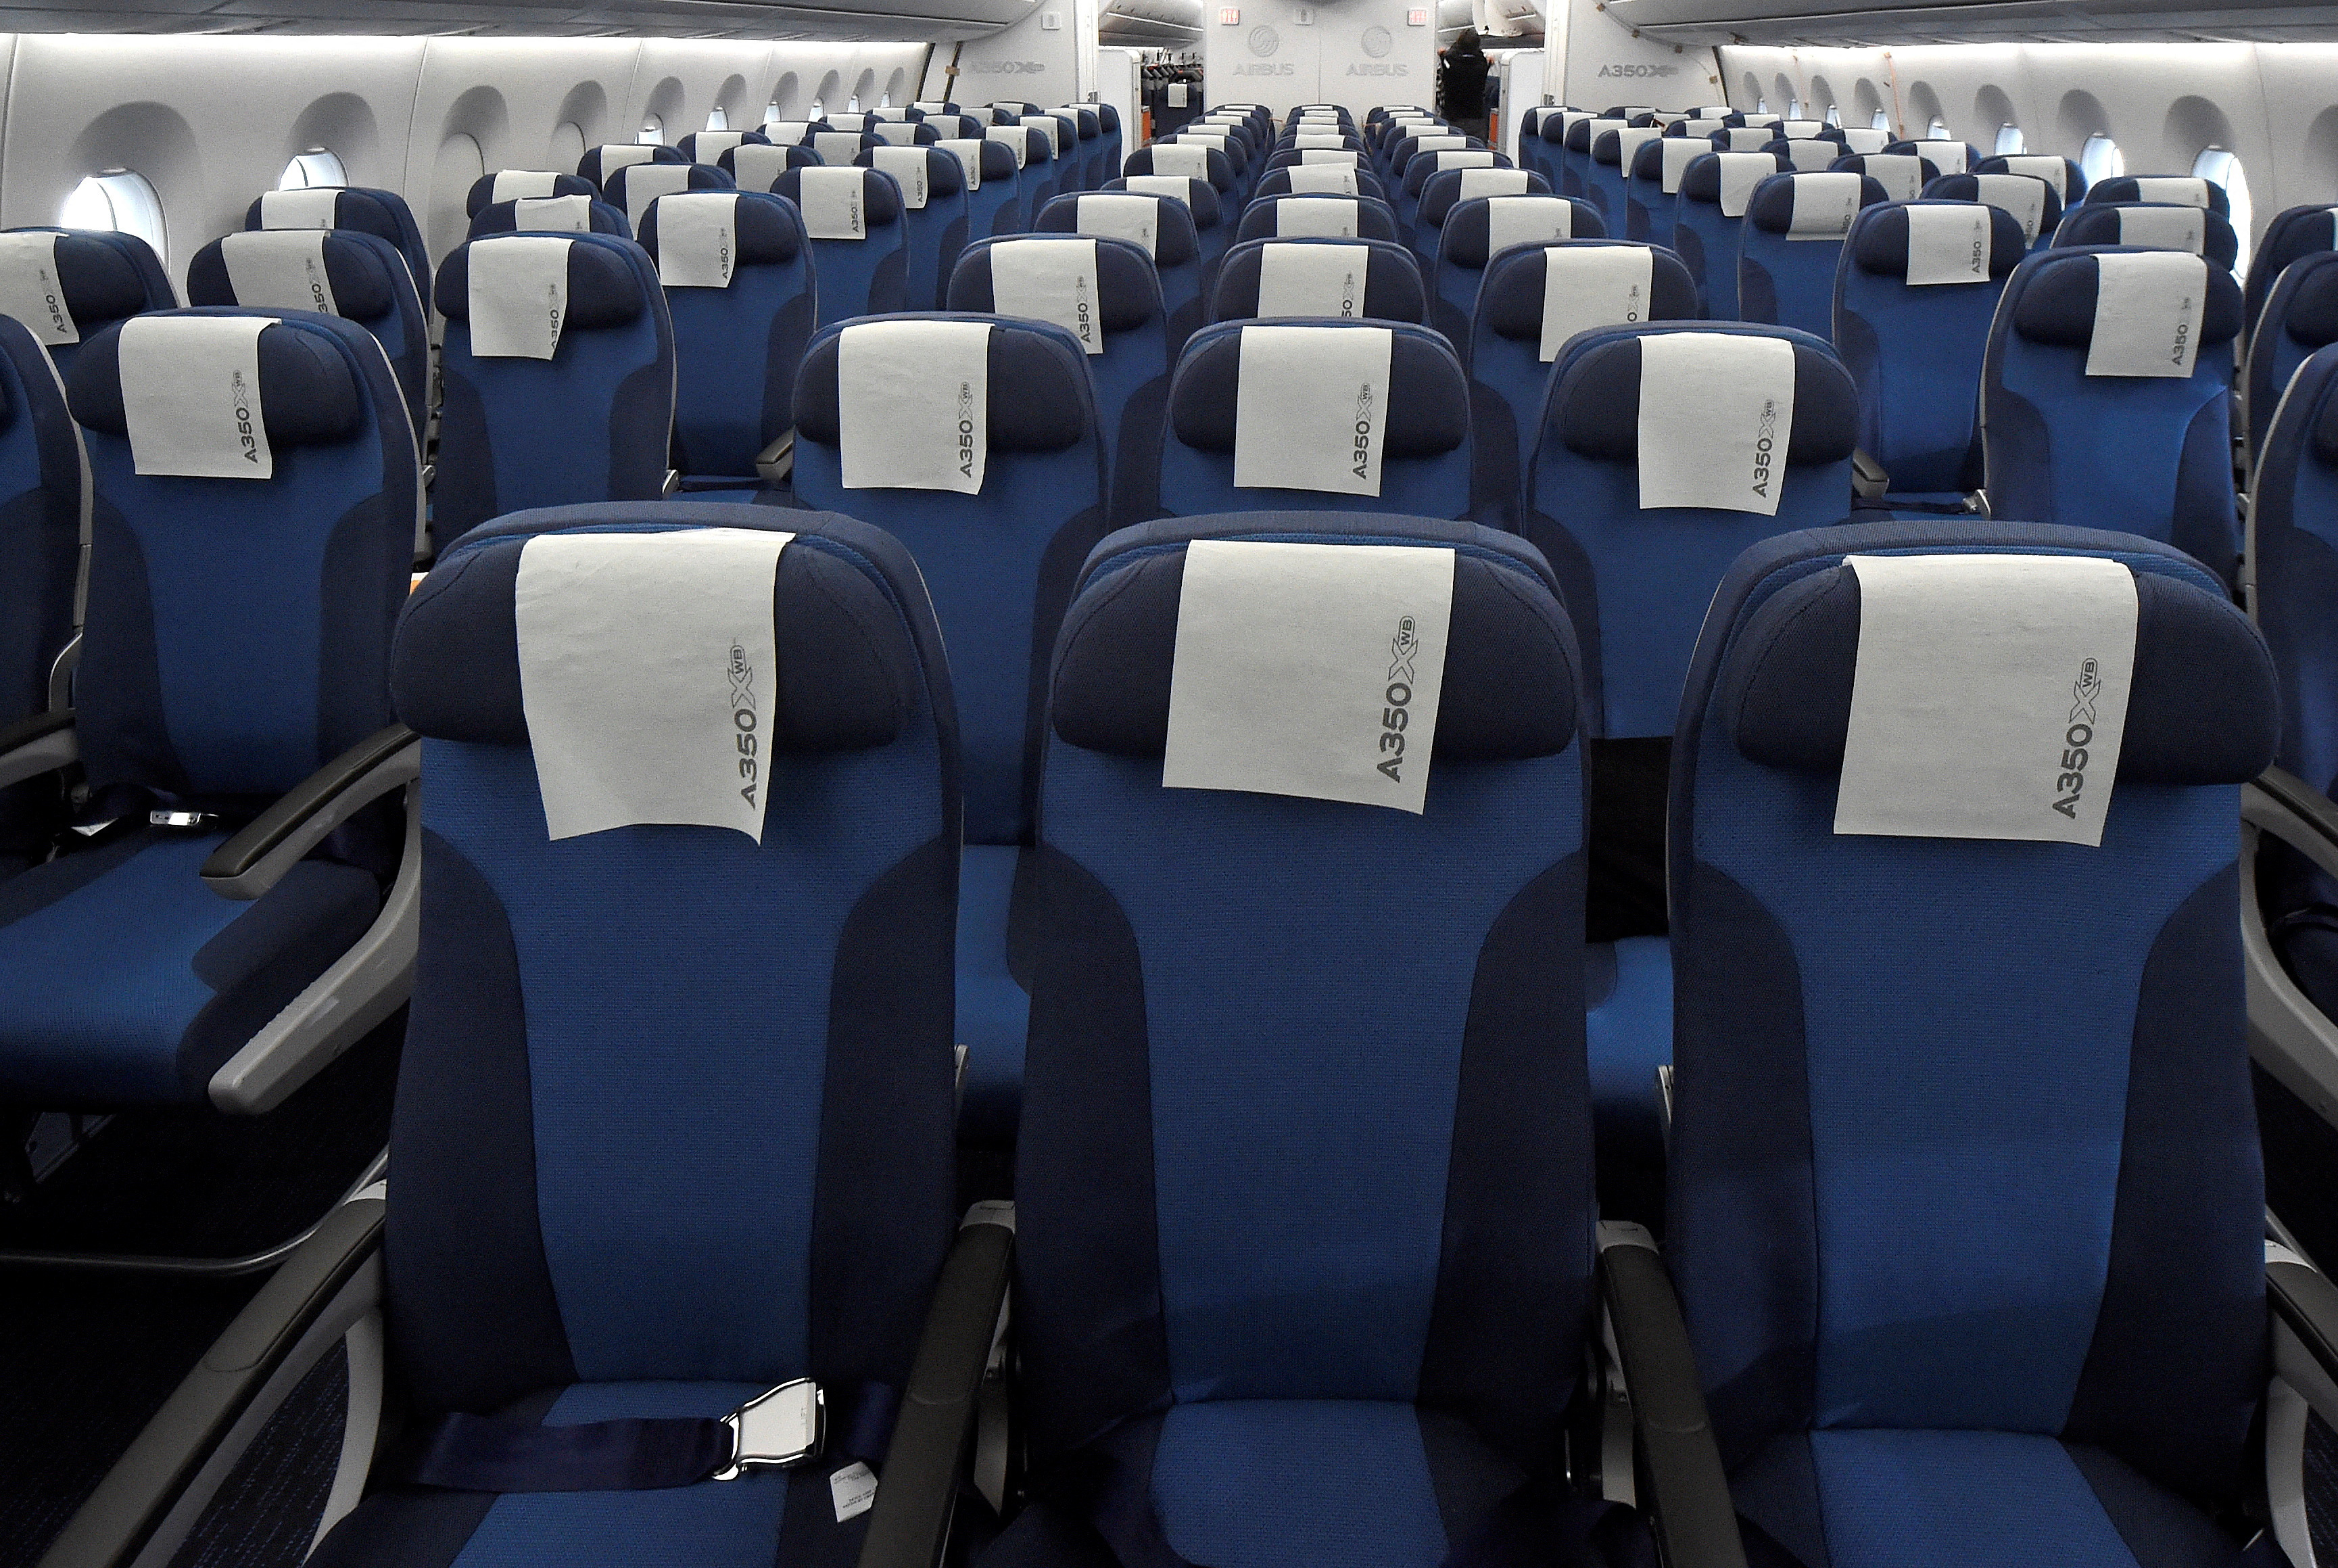 Rows of seats installed on board an Airbus A350